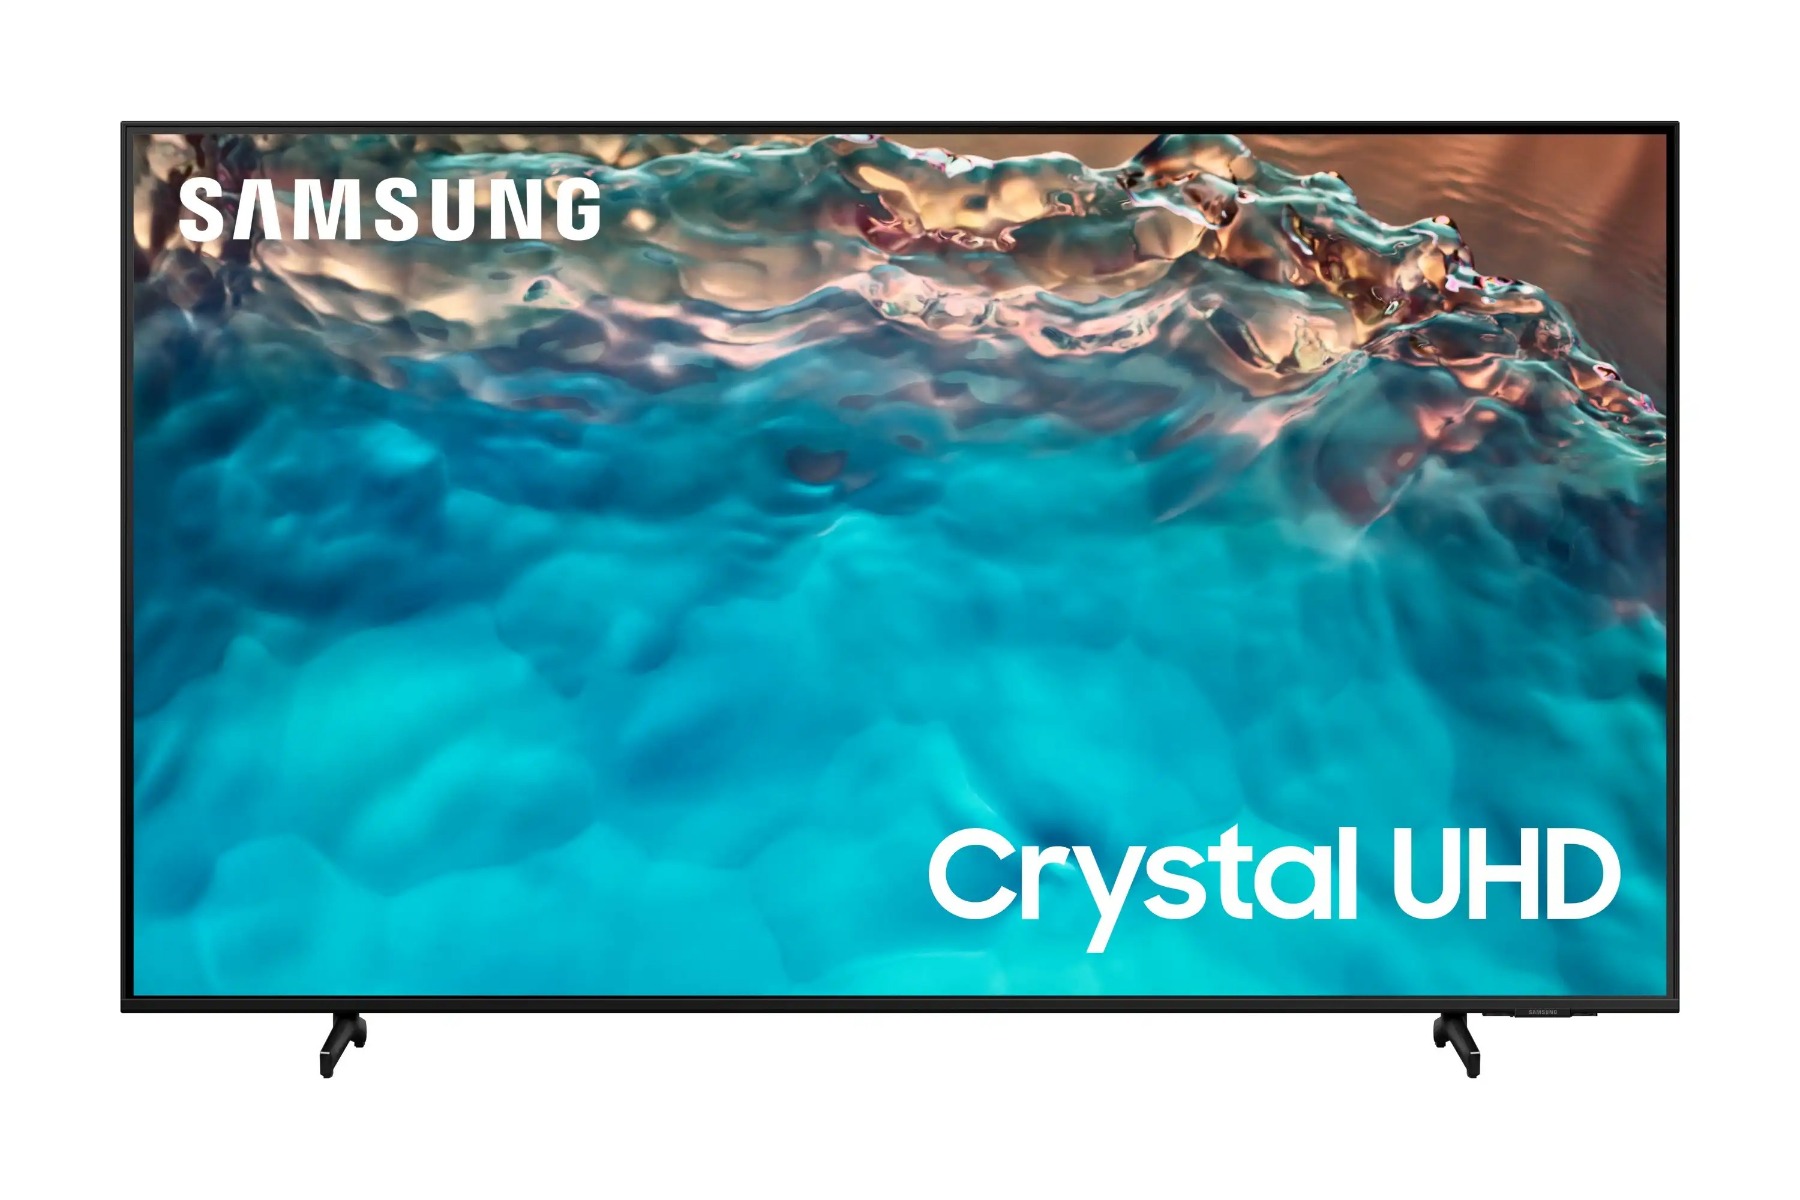 Samsung 55 Inch 4K UHD Smart LED TV with Built in Receiver - 55CU8000 with ETI TV Wall Mount, 26 to 55 Inch, Black - TX40